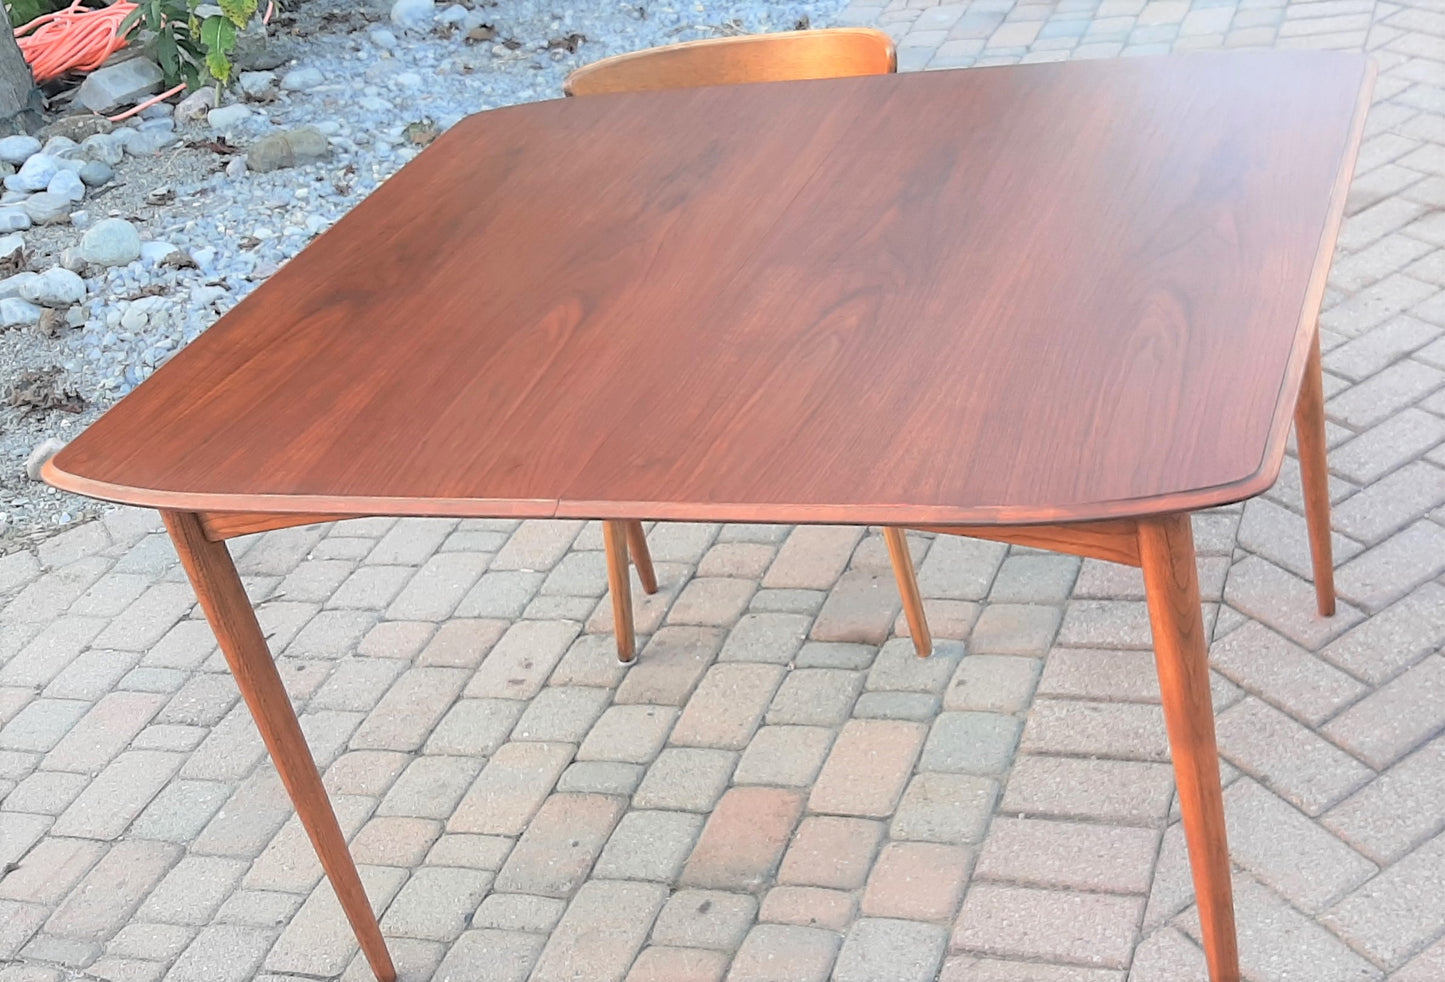 REFINISHED MCM Walnut Dining Table Extendable w 2 leaves by Deilcraft, perfect, 47"-71", optional custom glass - Mid Century Modern Toronto